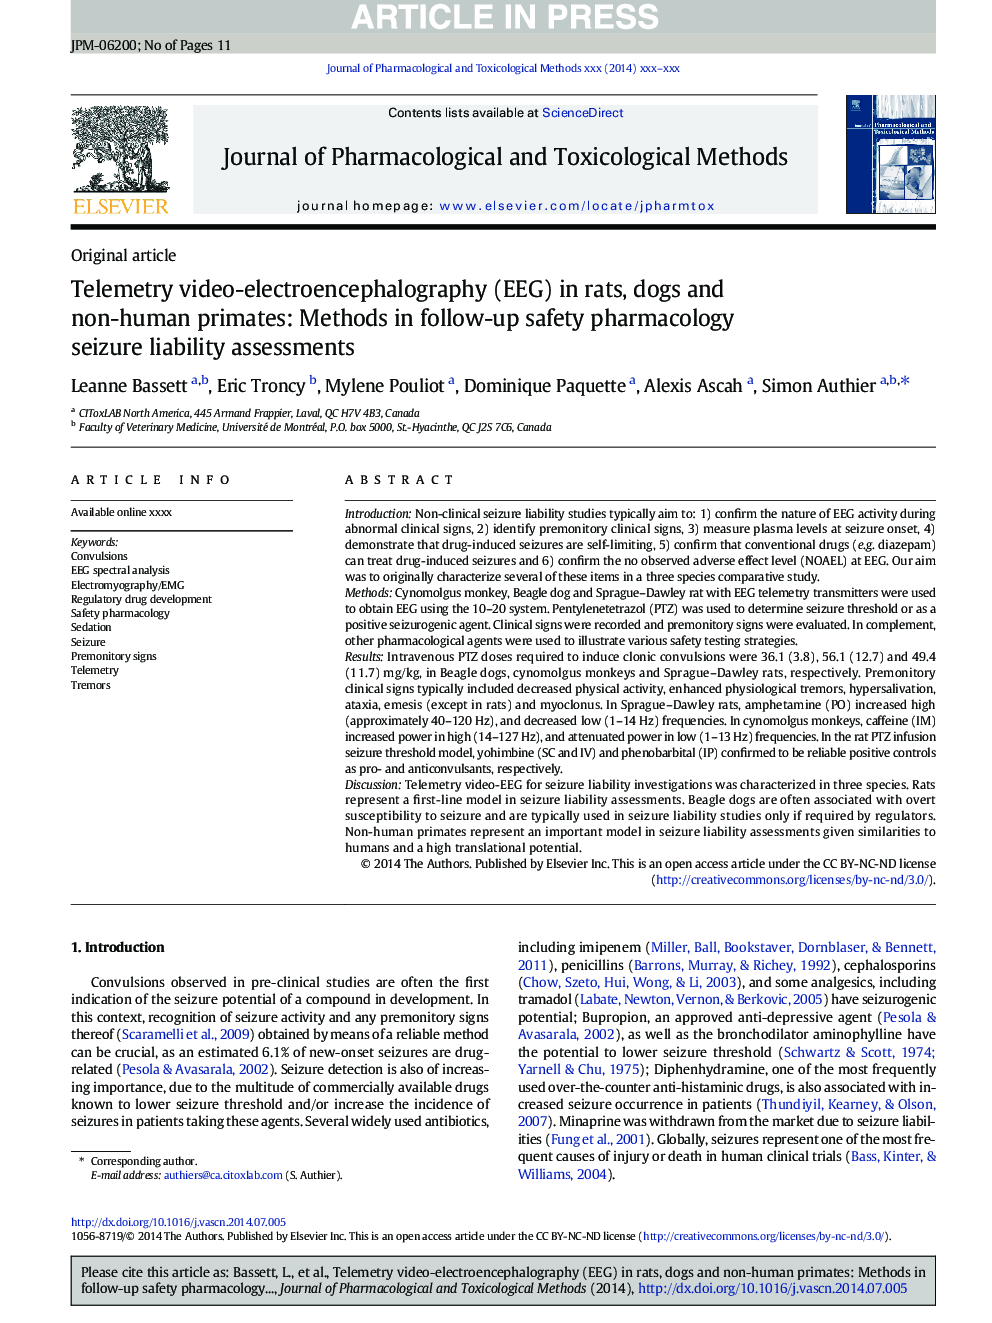 Telemetry video-electroencephalography (EEG) in rats, dogs and non-human primates: Methods in follow-up safety pharmacology seizure liability assessments